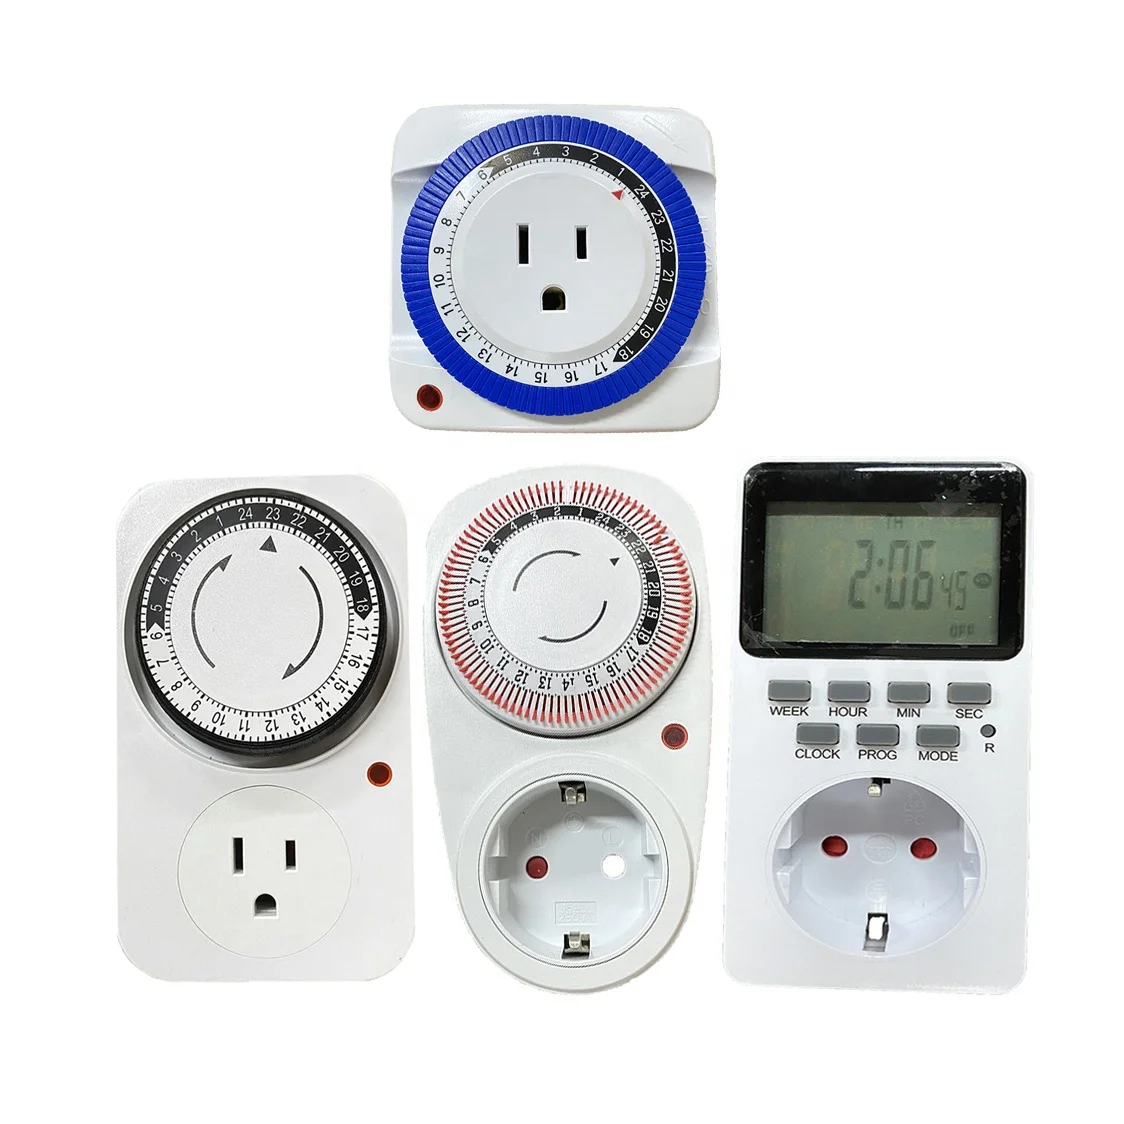 realiteit Verhuizer invoeren Mechanical Electric 24 Hour Plug-in Outlet Timer Switch Programmable Indoor  Timer For Grow Tent Lights - Buy Electric Outlet Timer,Grow Tent Timer,Electrical  Mechanical Timer Product on Alibaba.com